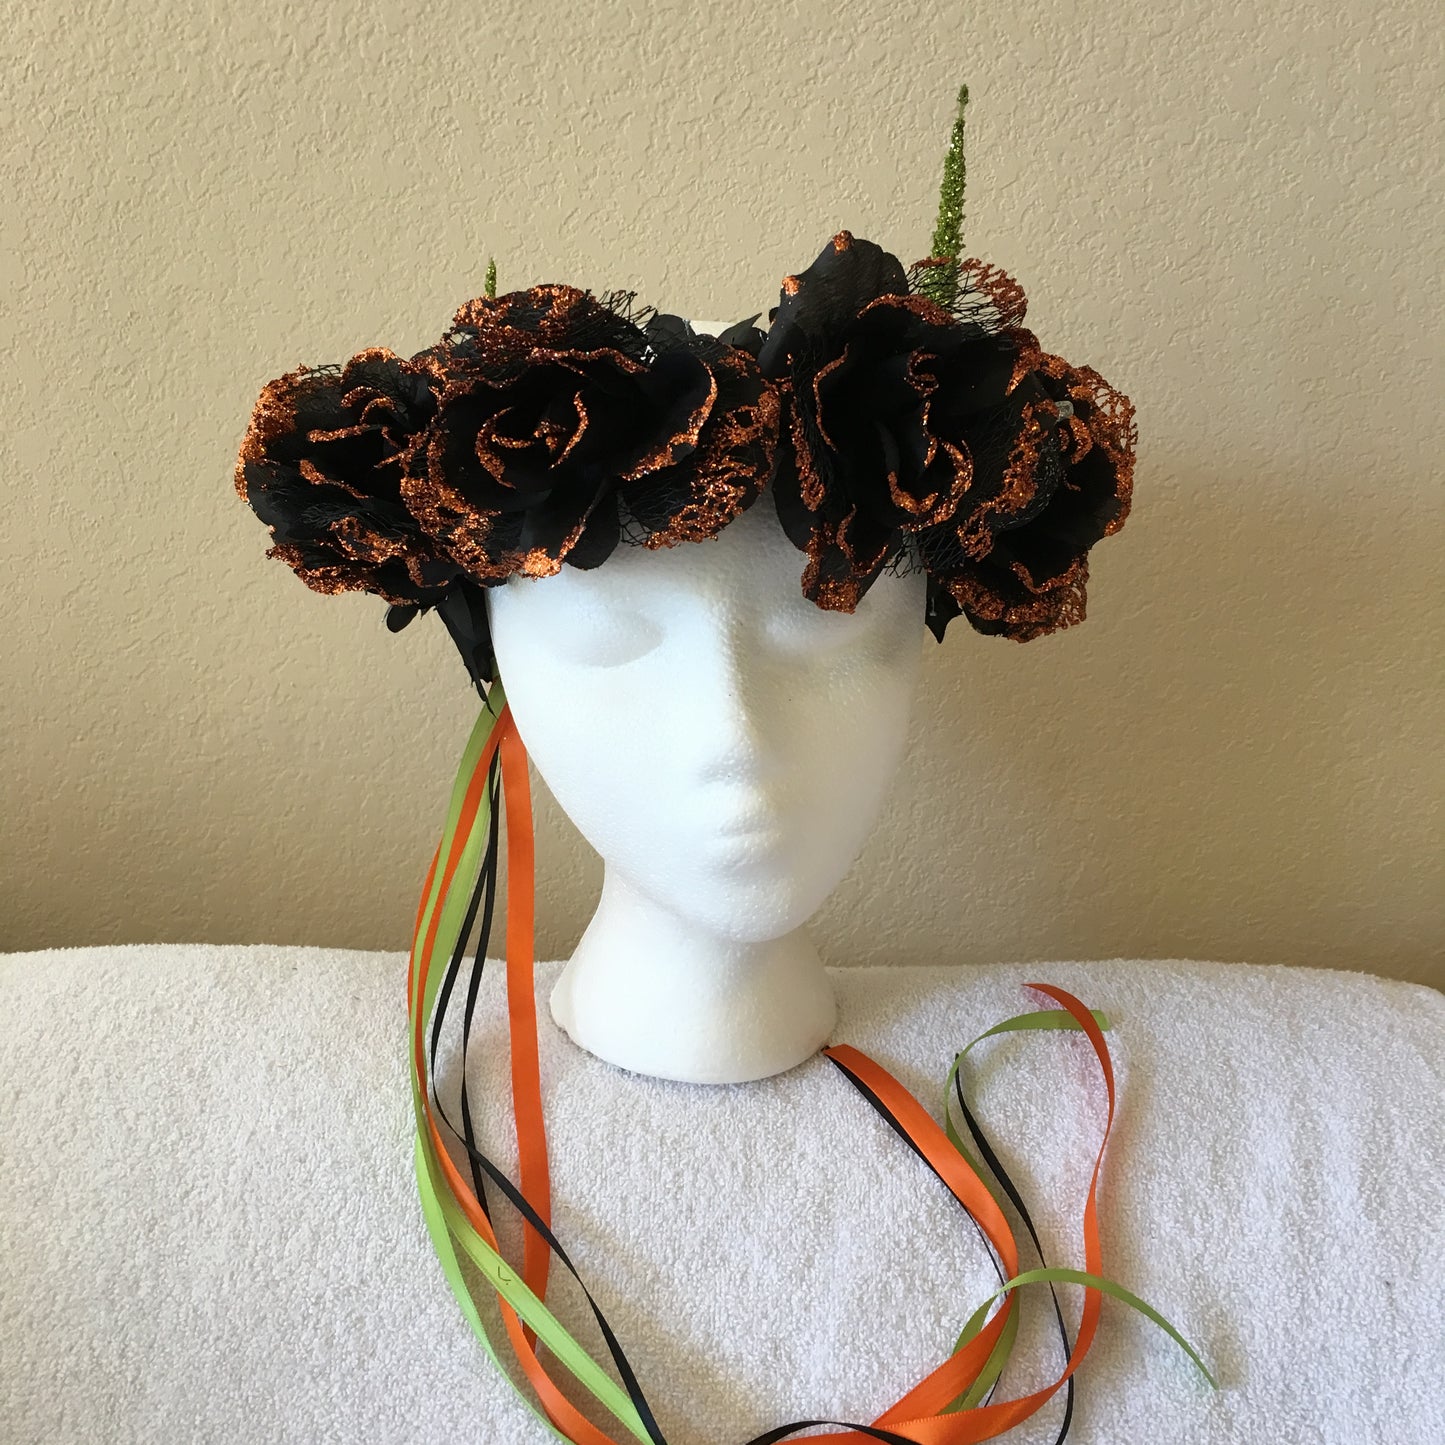 Large Wreath - Sparkly orange roses w/ green spike accents